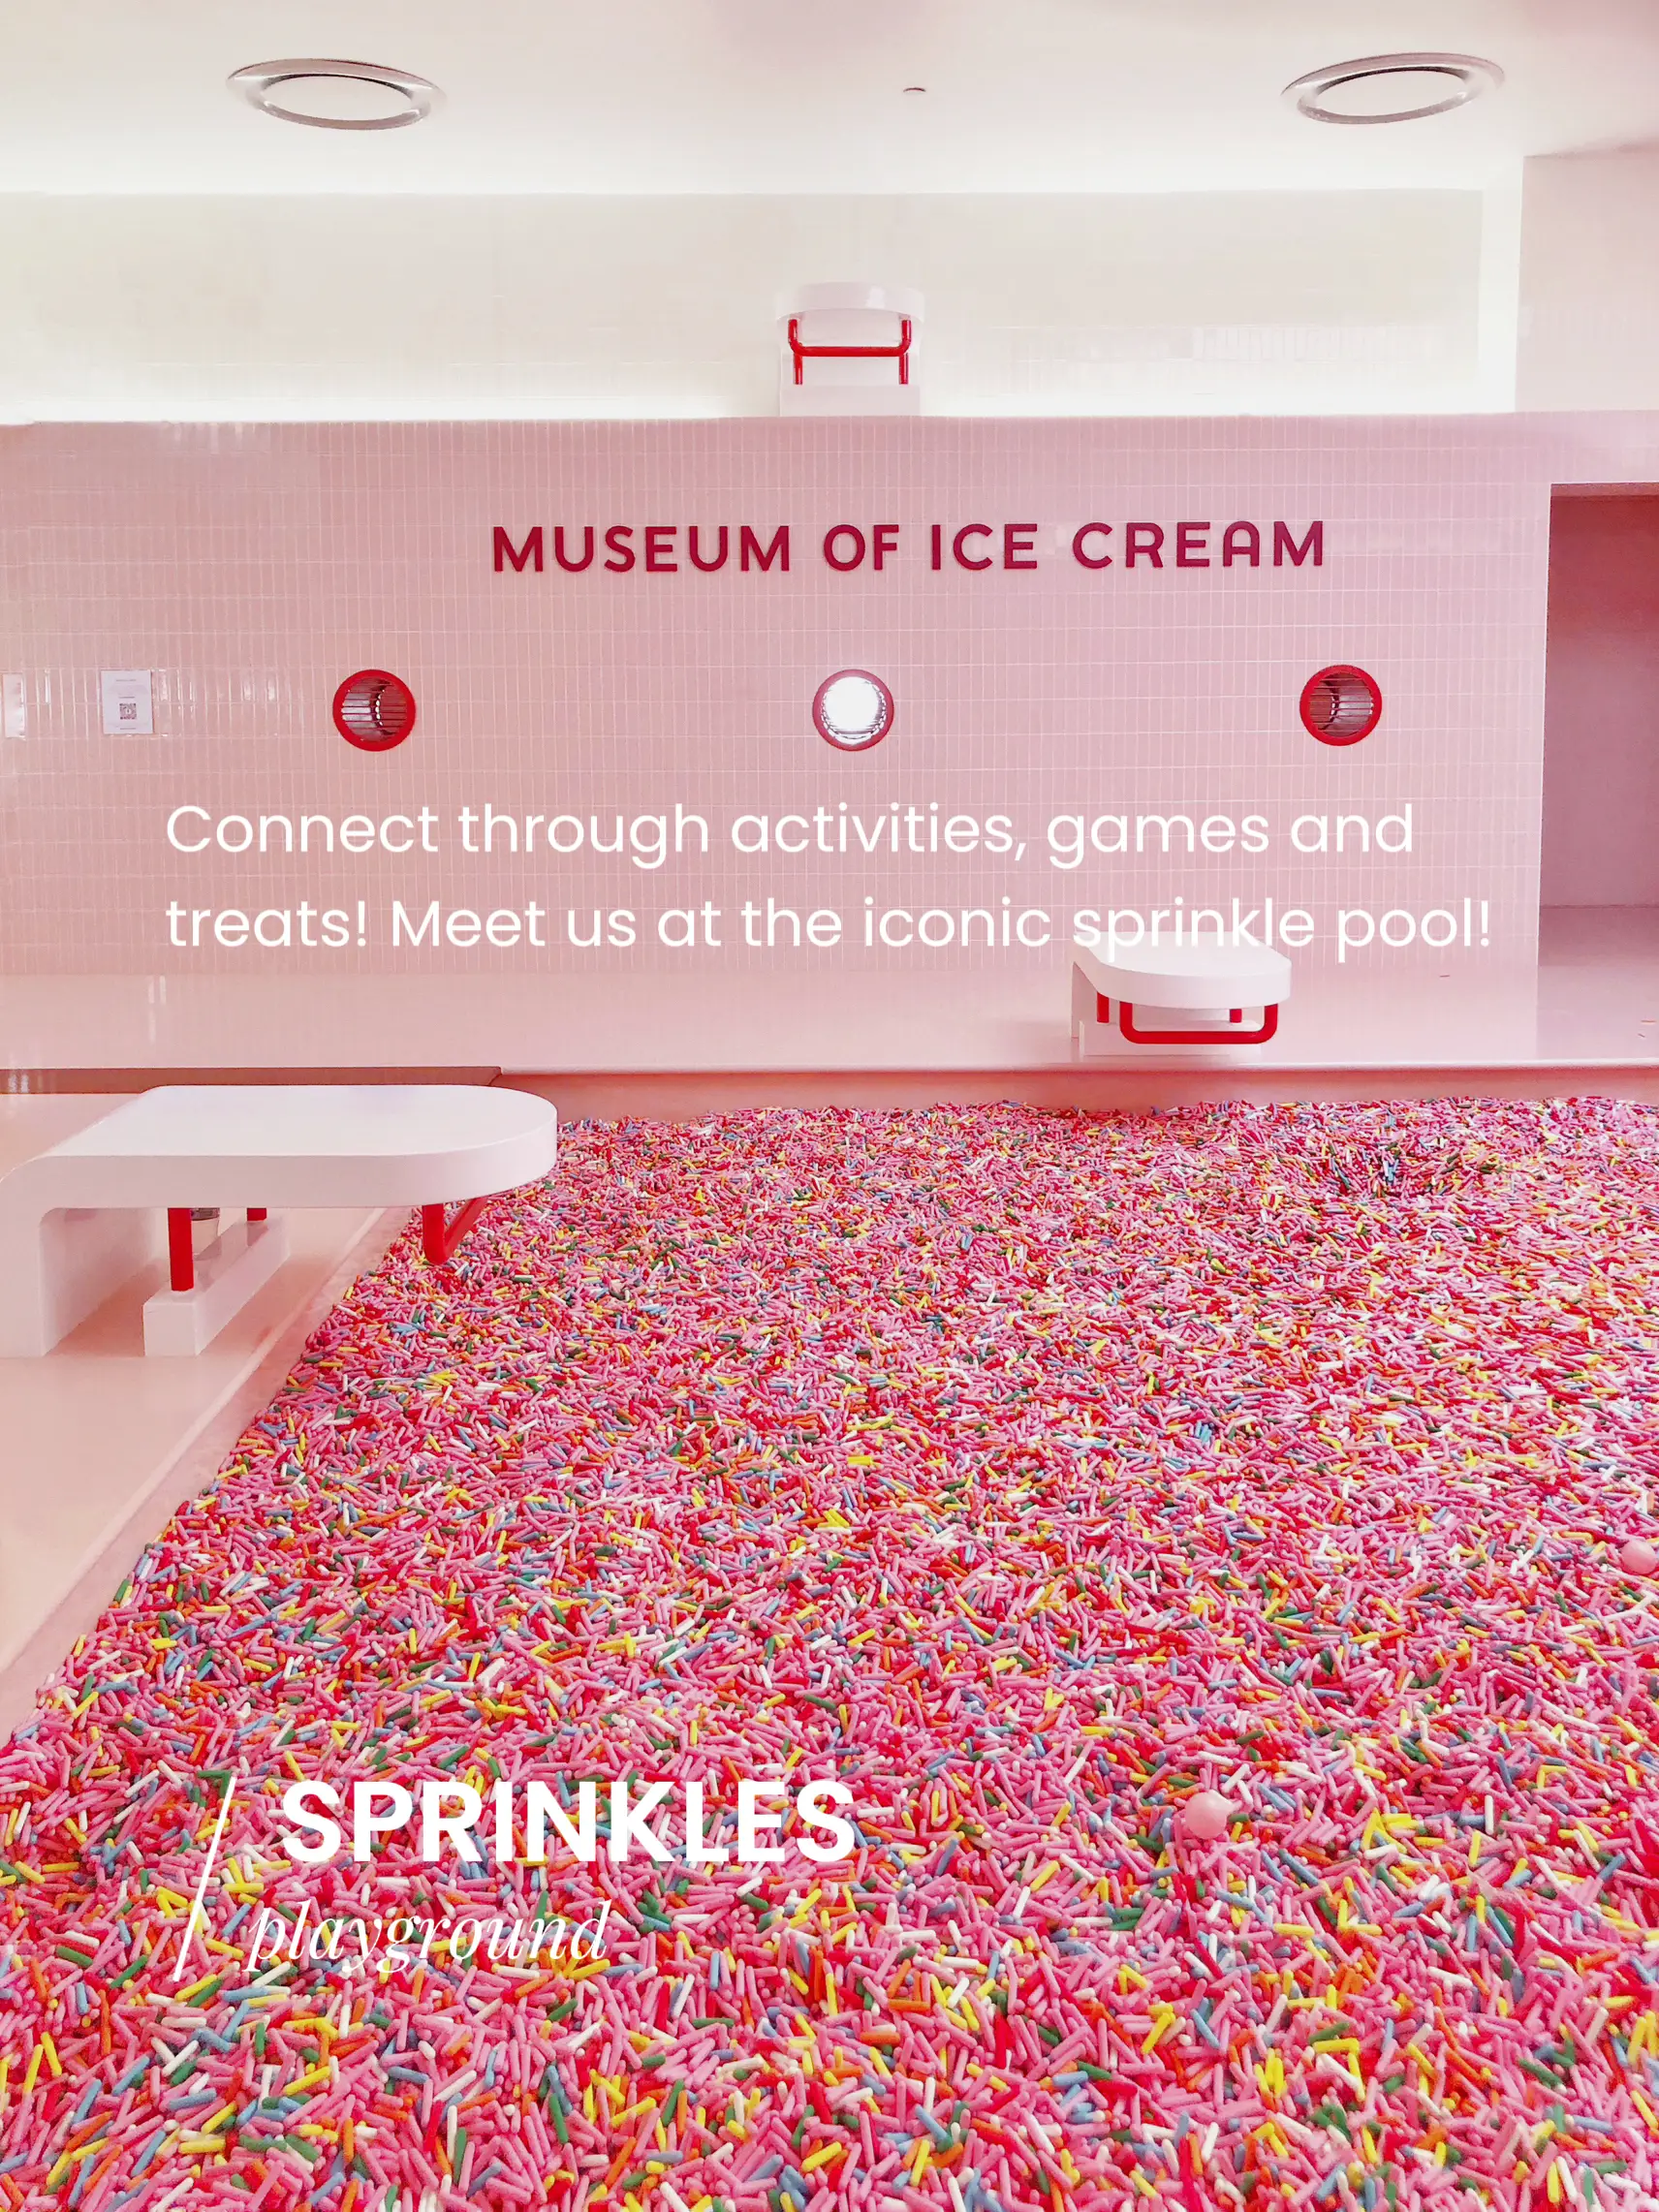  A large collection of colorful sprinkles are scattered around a playground.